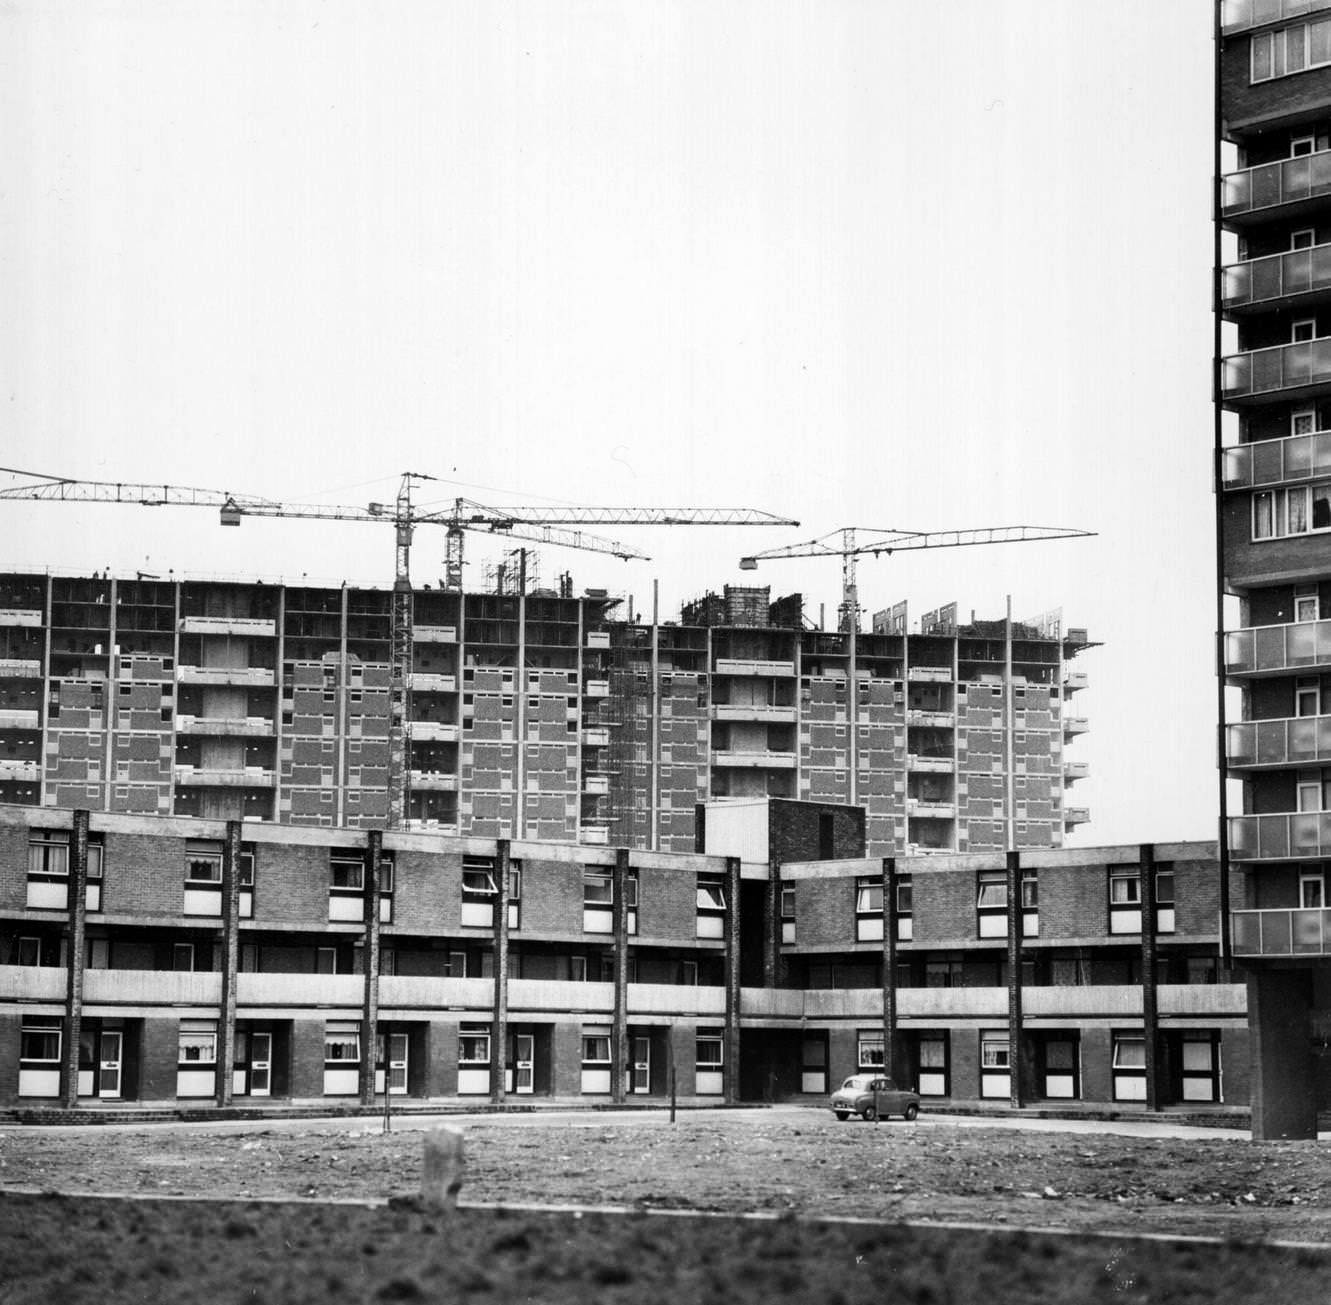 Modern housing in the Gorbals area of Glasgow, some of it under construction, 1960